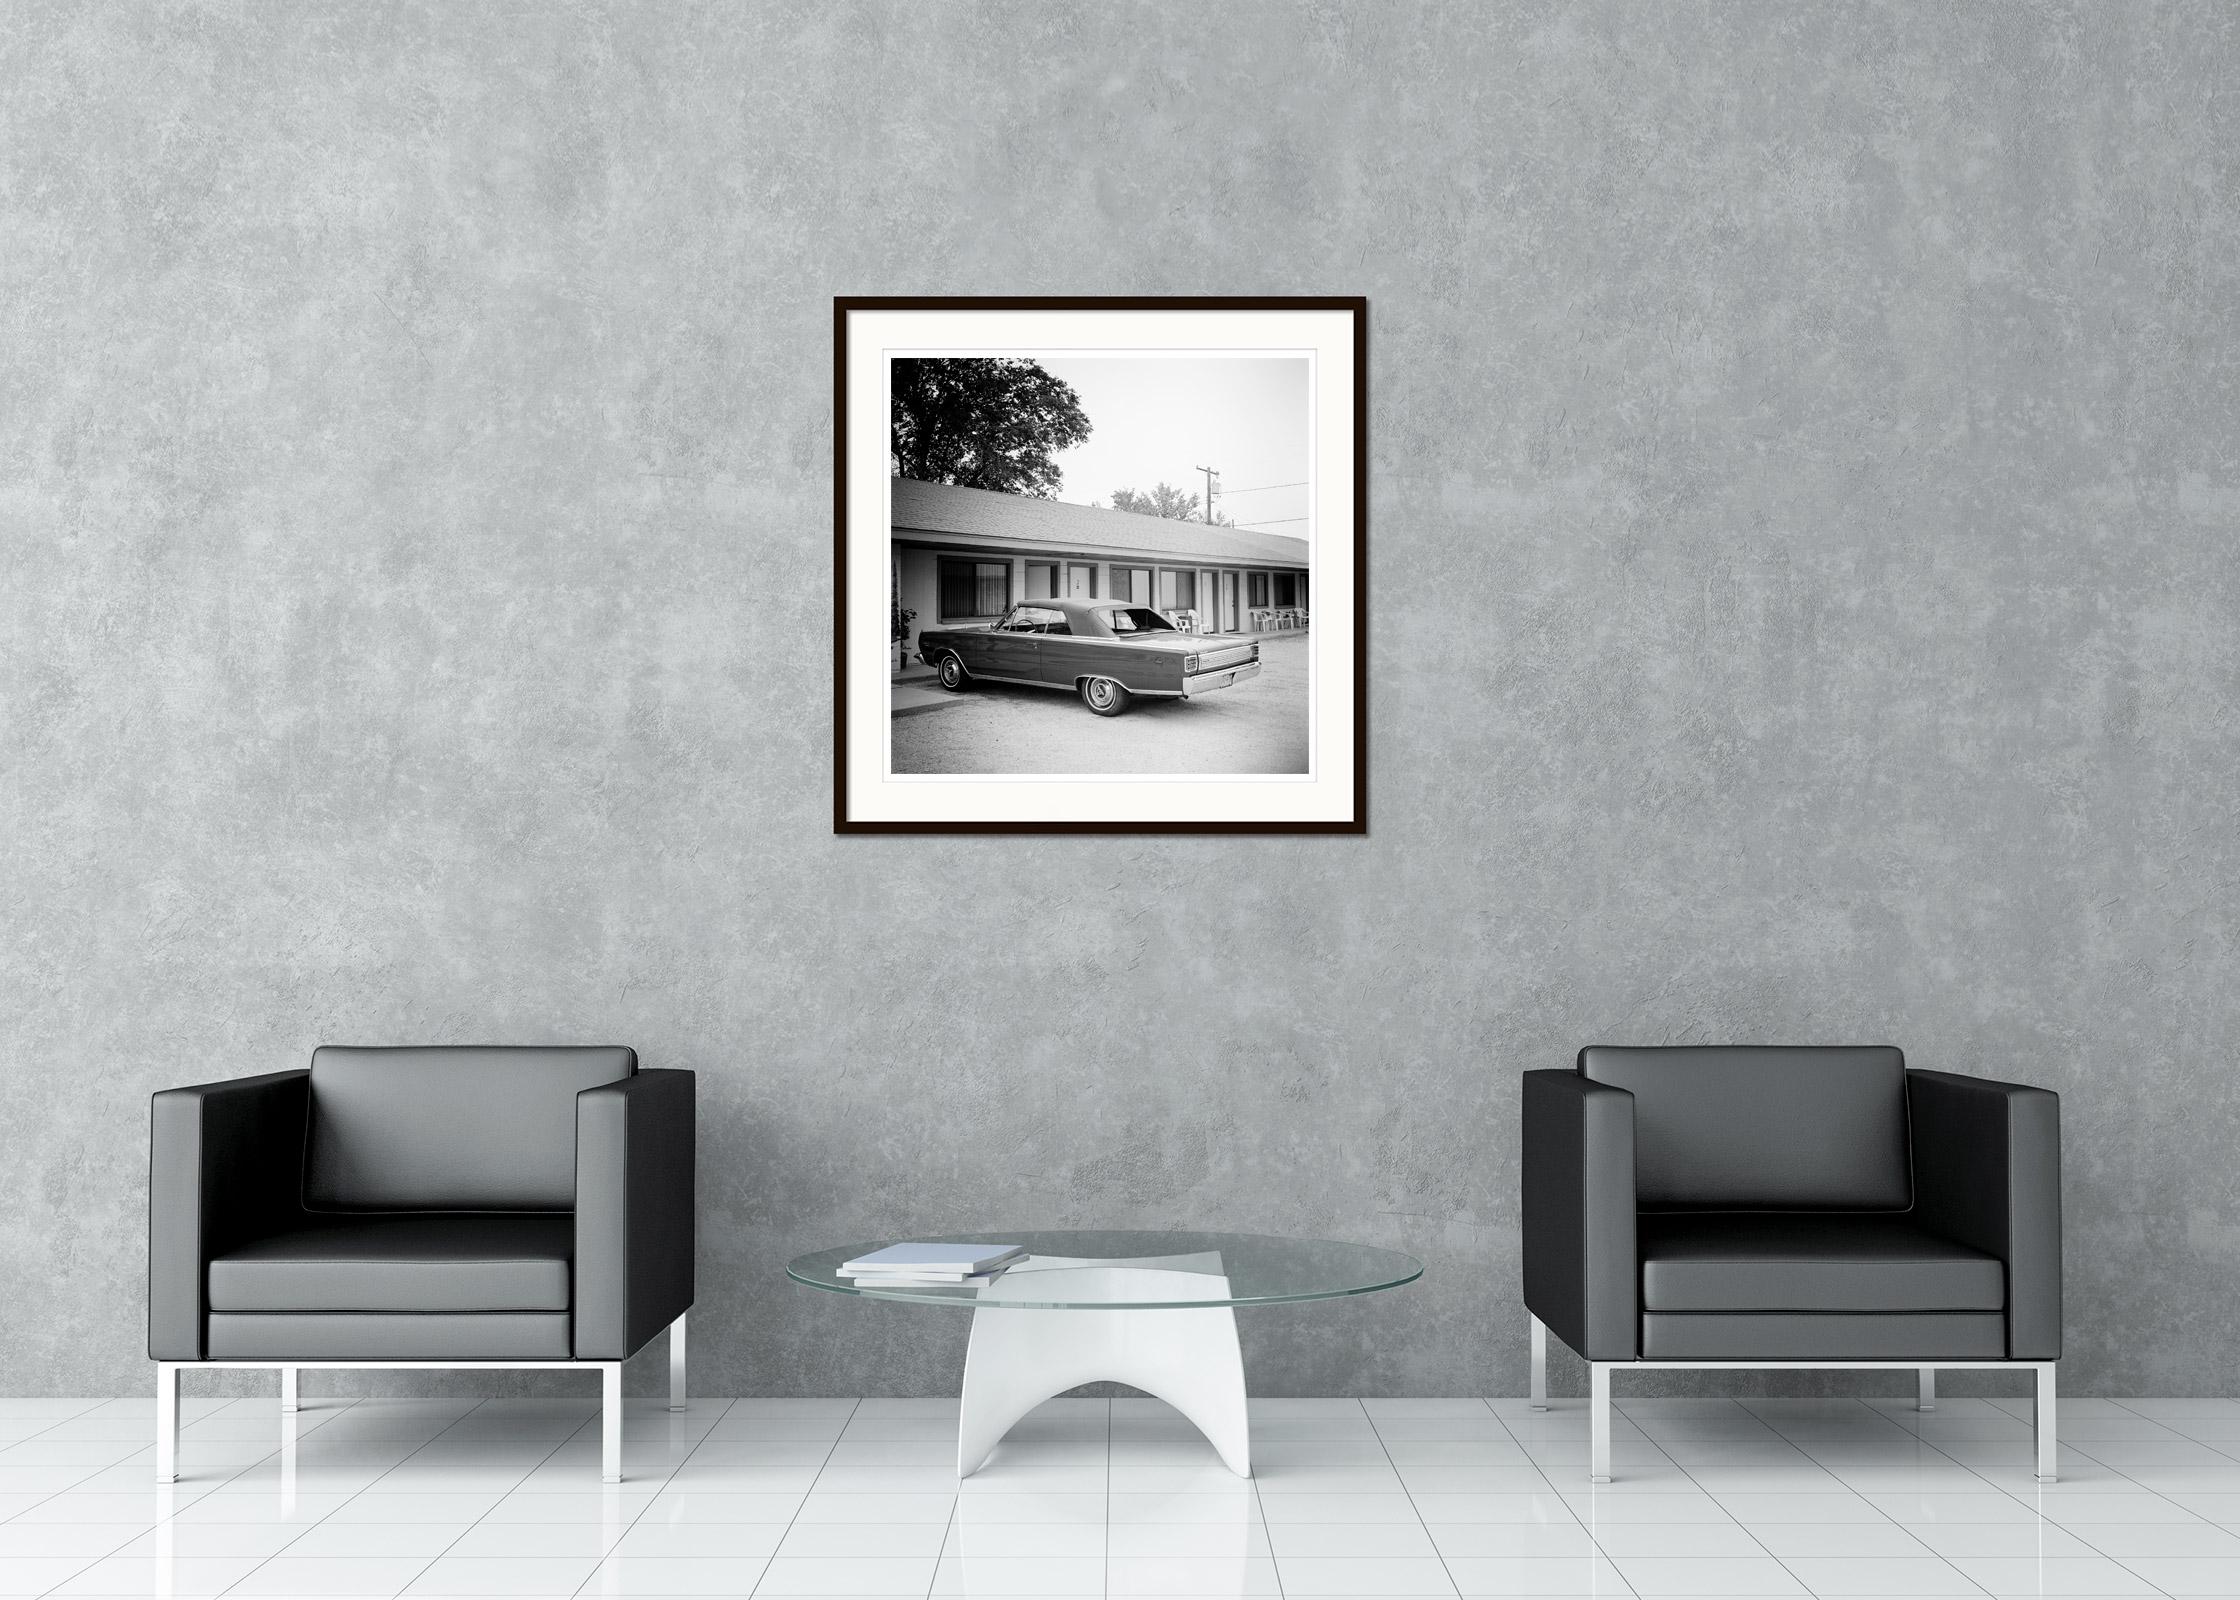 Black and white fine art landscape photography.  1967 Plymouth classic car in front of a motel on route 66, USA. Archival pigment ink print as part of a limited edition of 9. All Gerald Berghammer prints are made to order in limited editions on